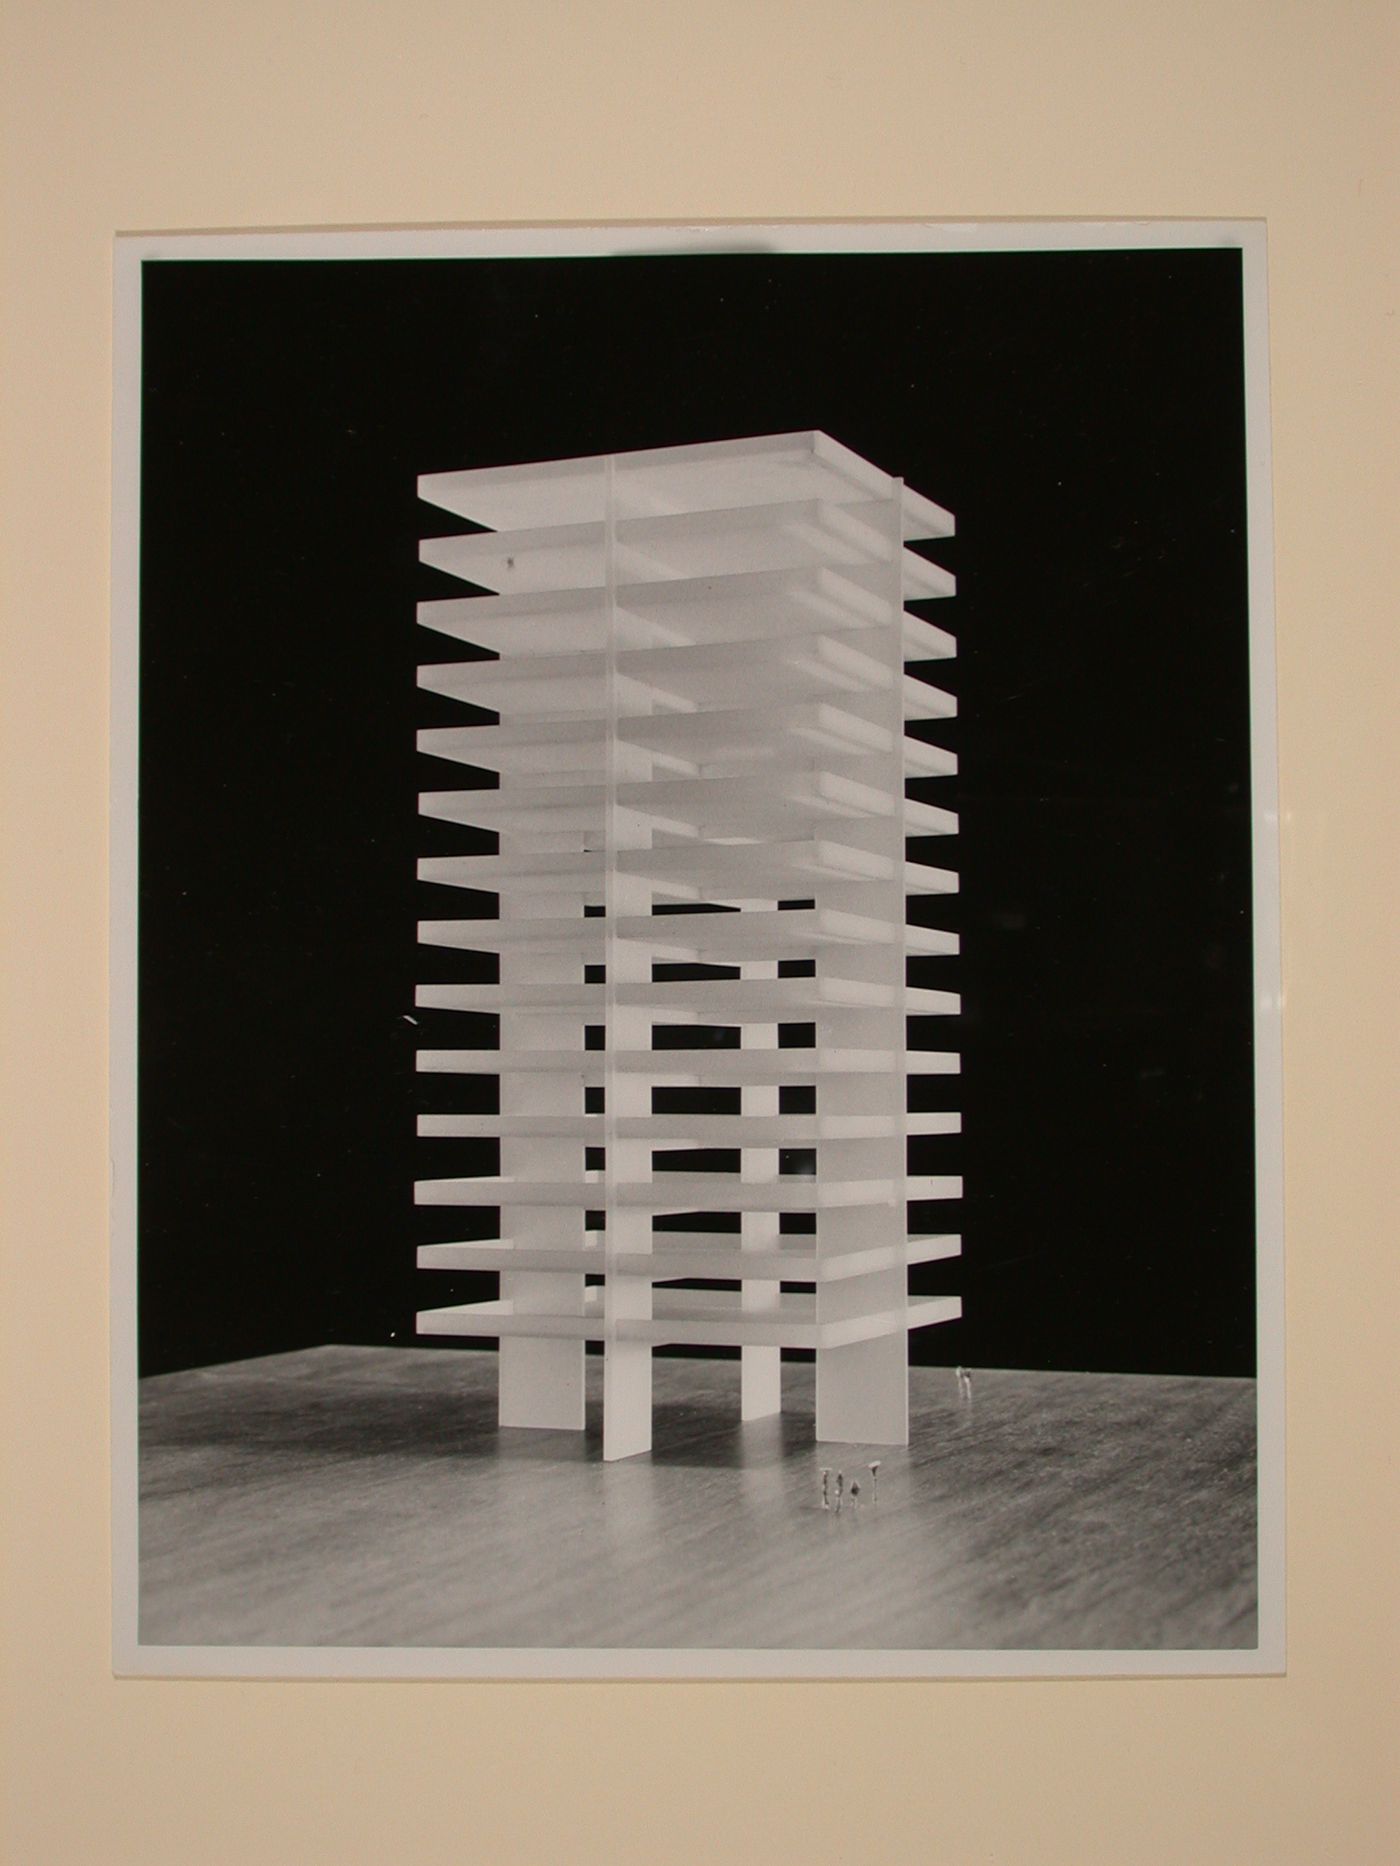 Photograph of a student [?] model for a concrete slab building with external cruciform bearing walls, Sequence of Tall Buildings